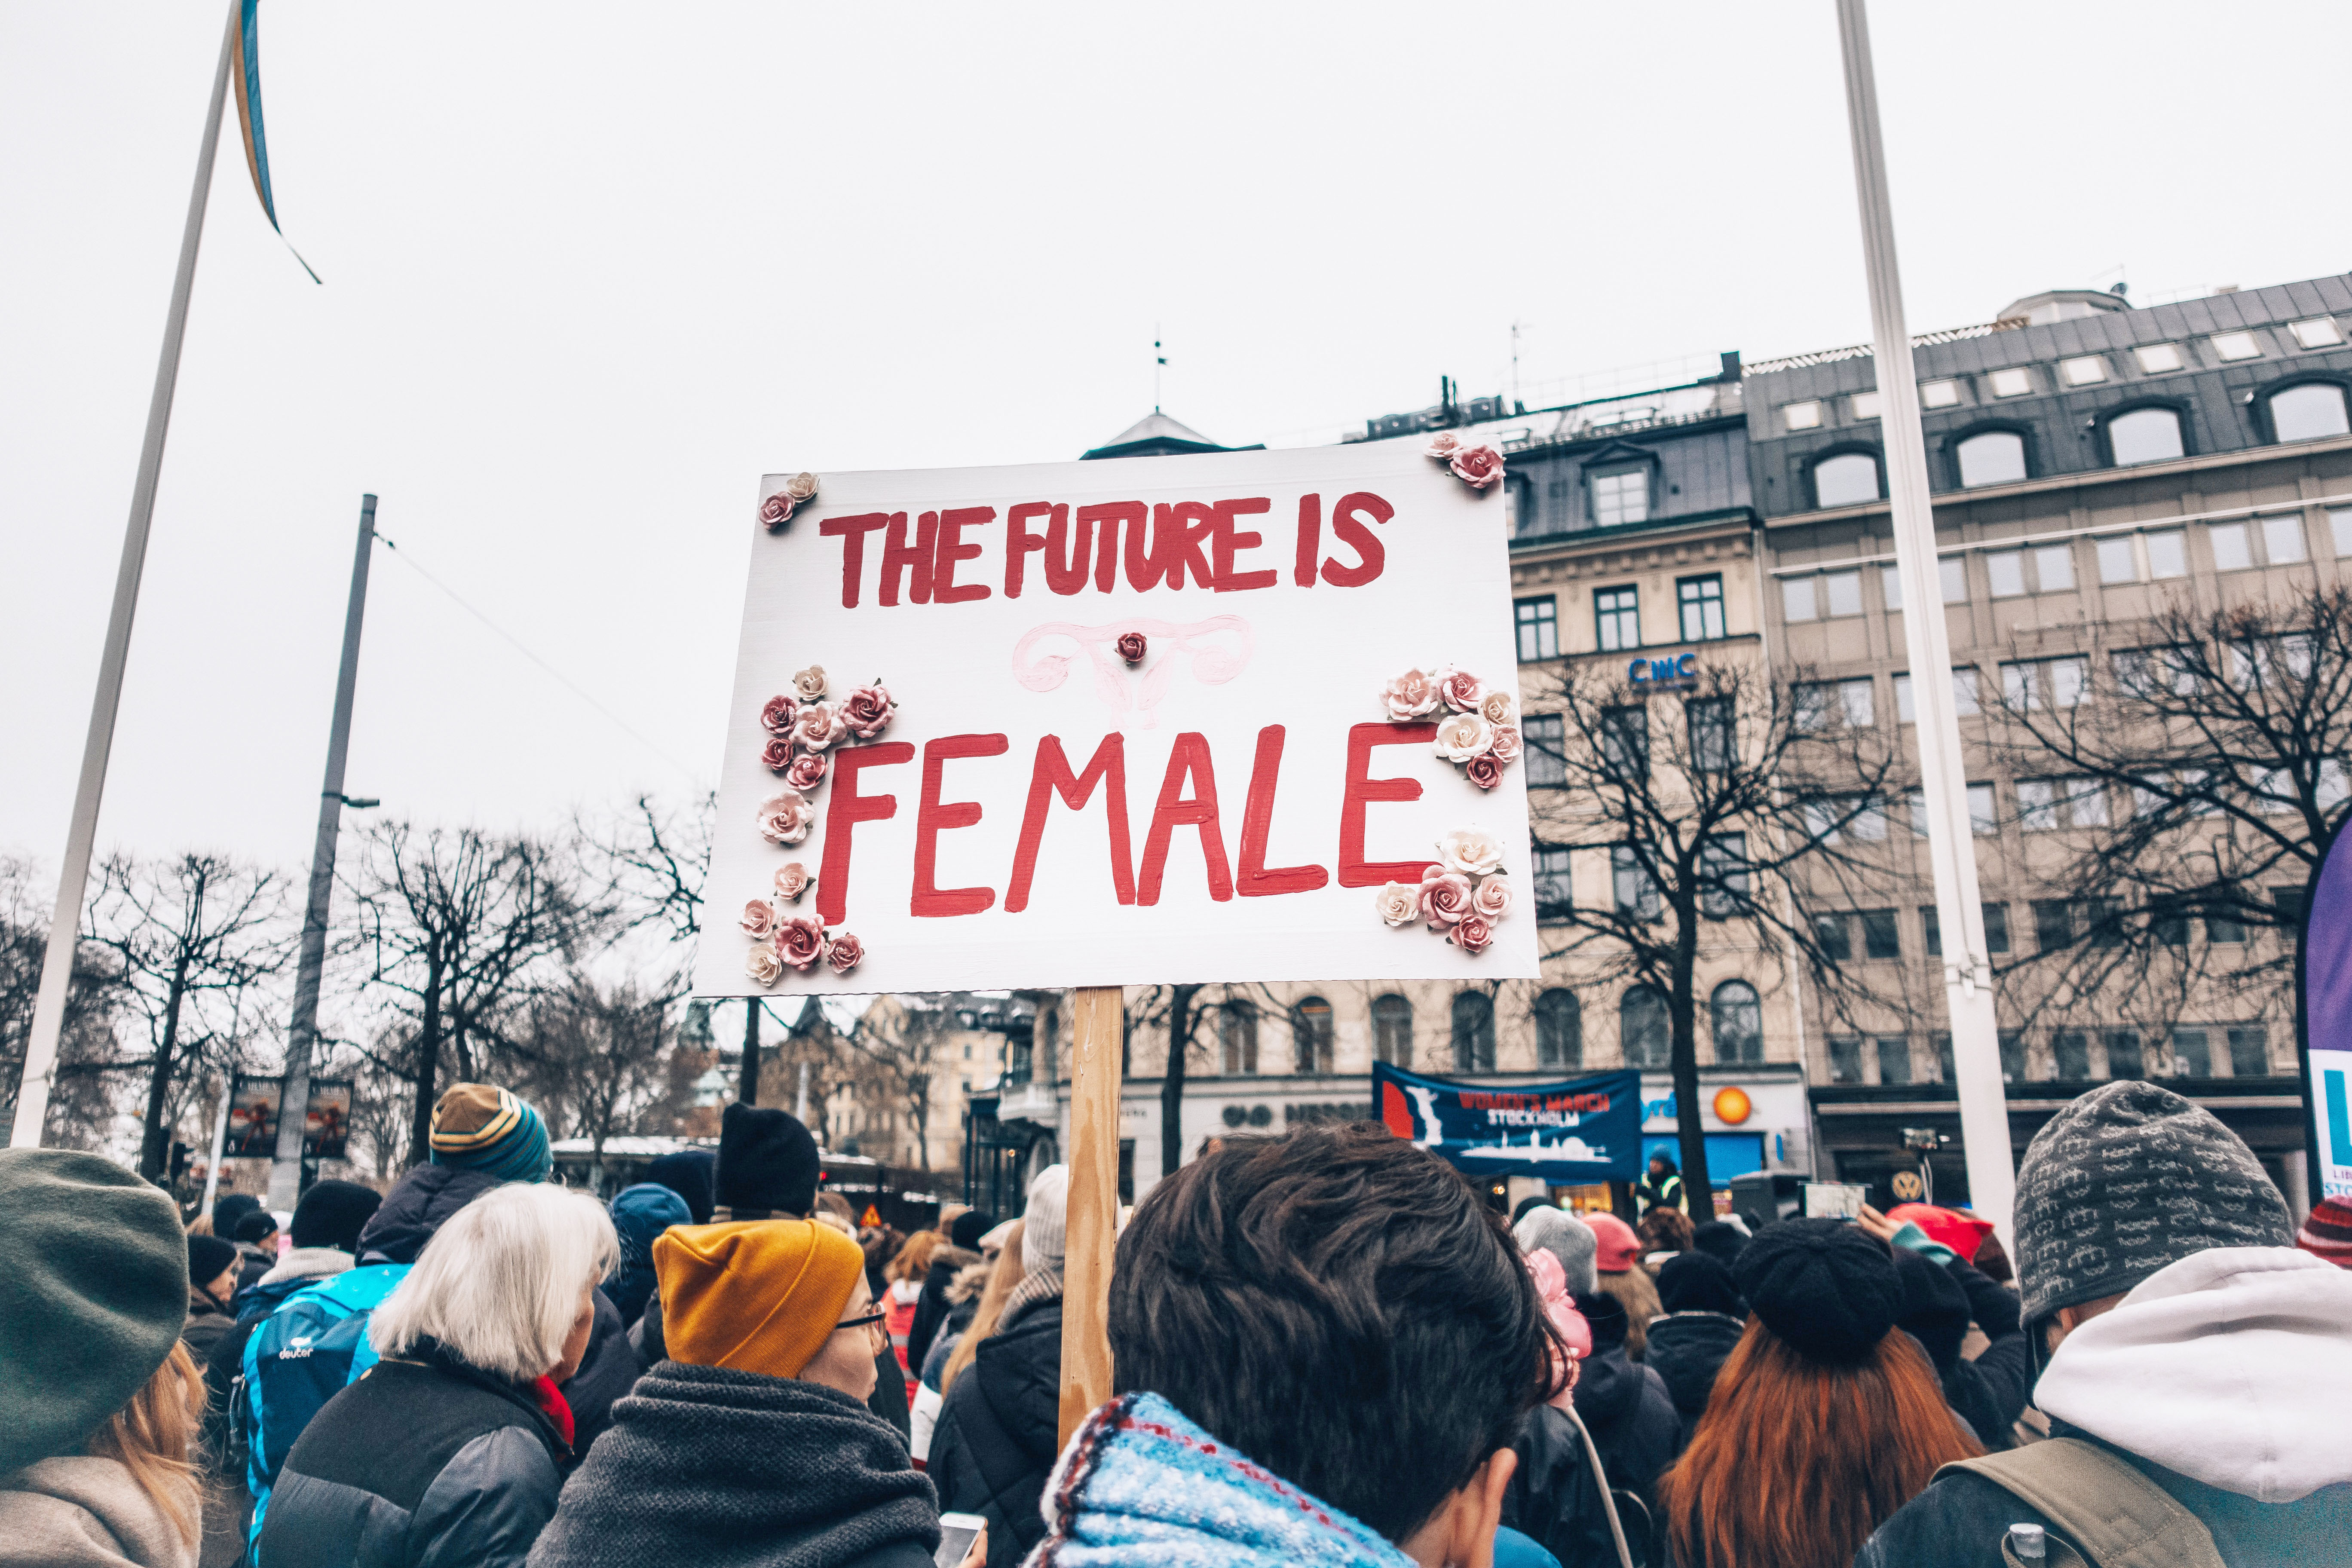 4 Waves Feminism: Here's How Has Changed Over Time